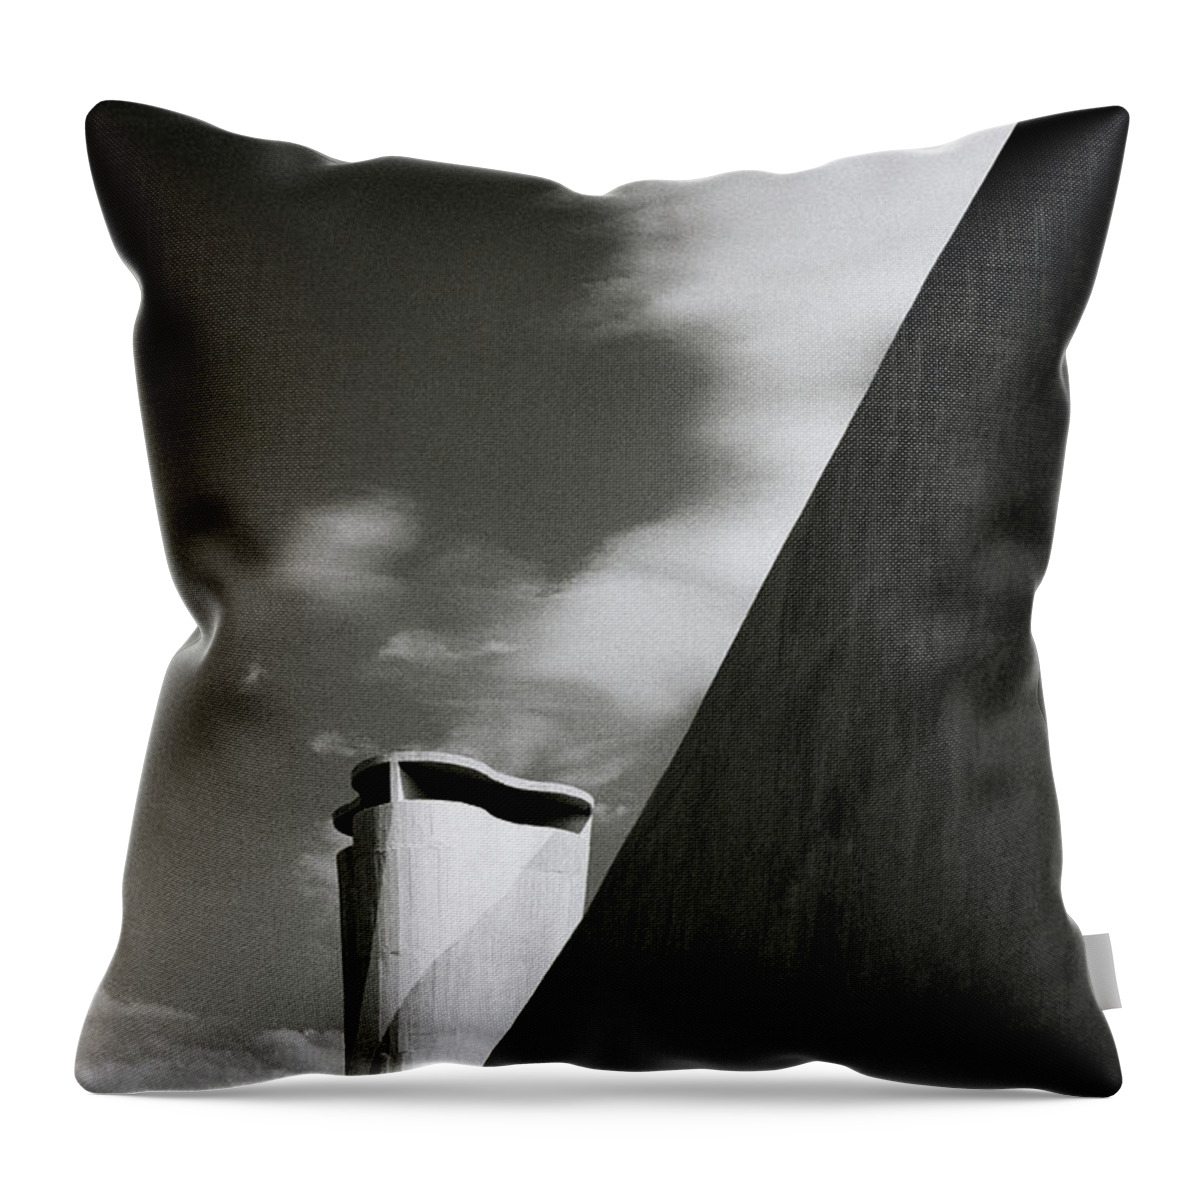 Le Corbusier Throw Pillow featuring the photograph Cite Radieuse by Shaun Higson